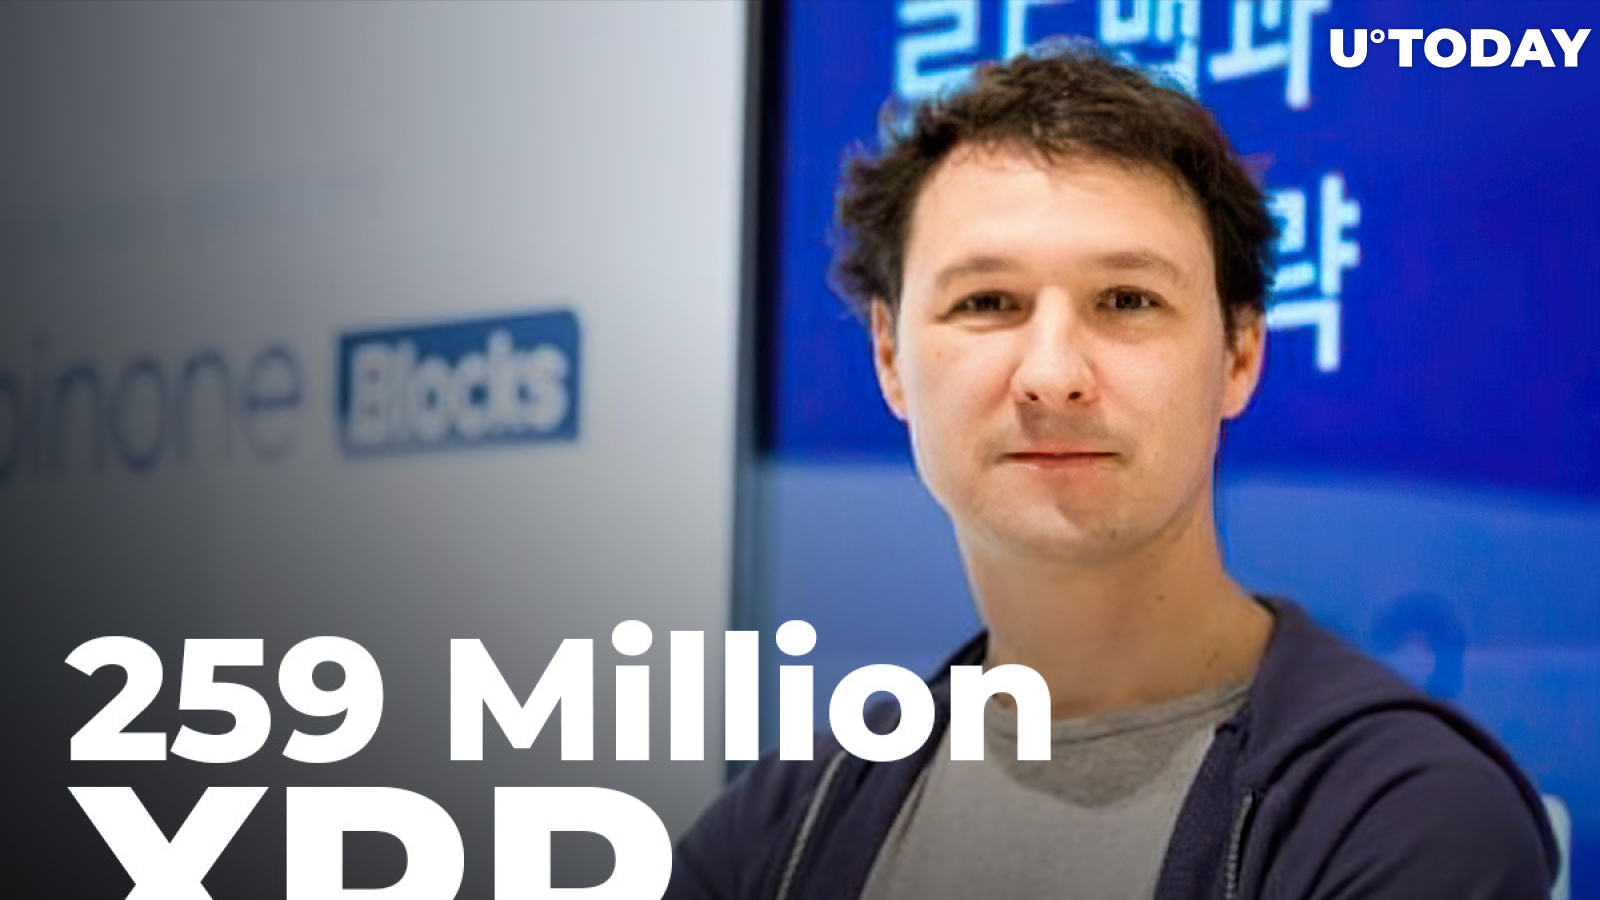 Former Ripple’s Jed McCaleb Dumps 259 Million XRP, 502 Million Still in His Wallet